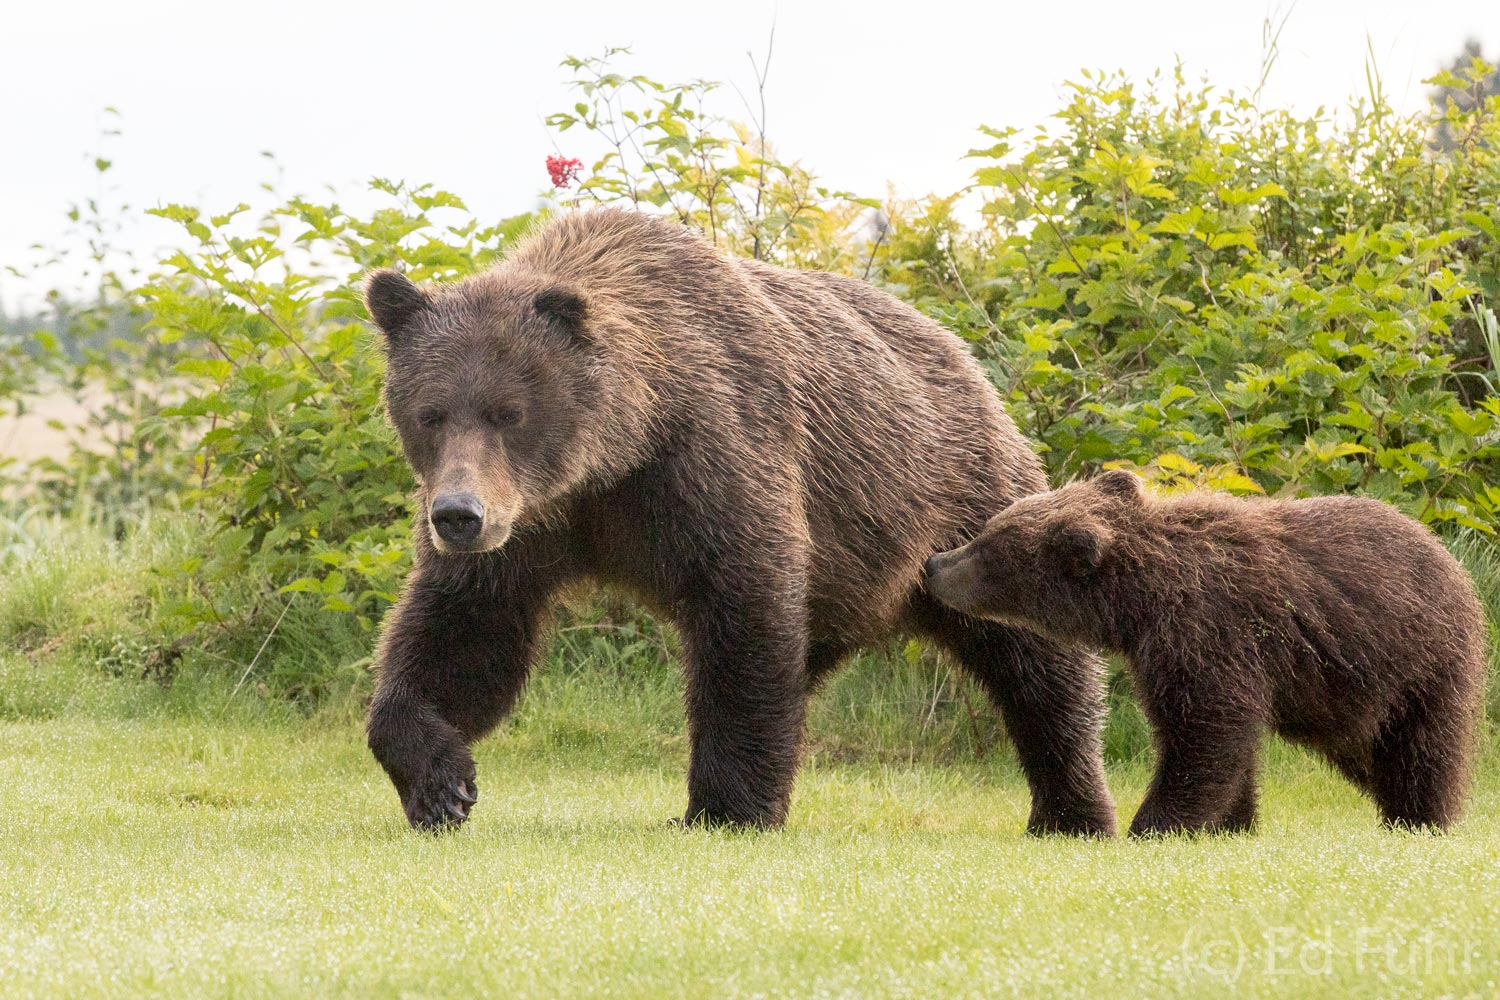 Just after sunrise a brown bear and cub strolled through our camp.